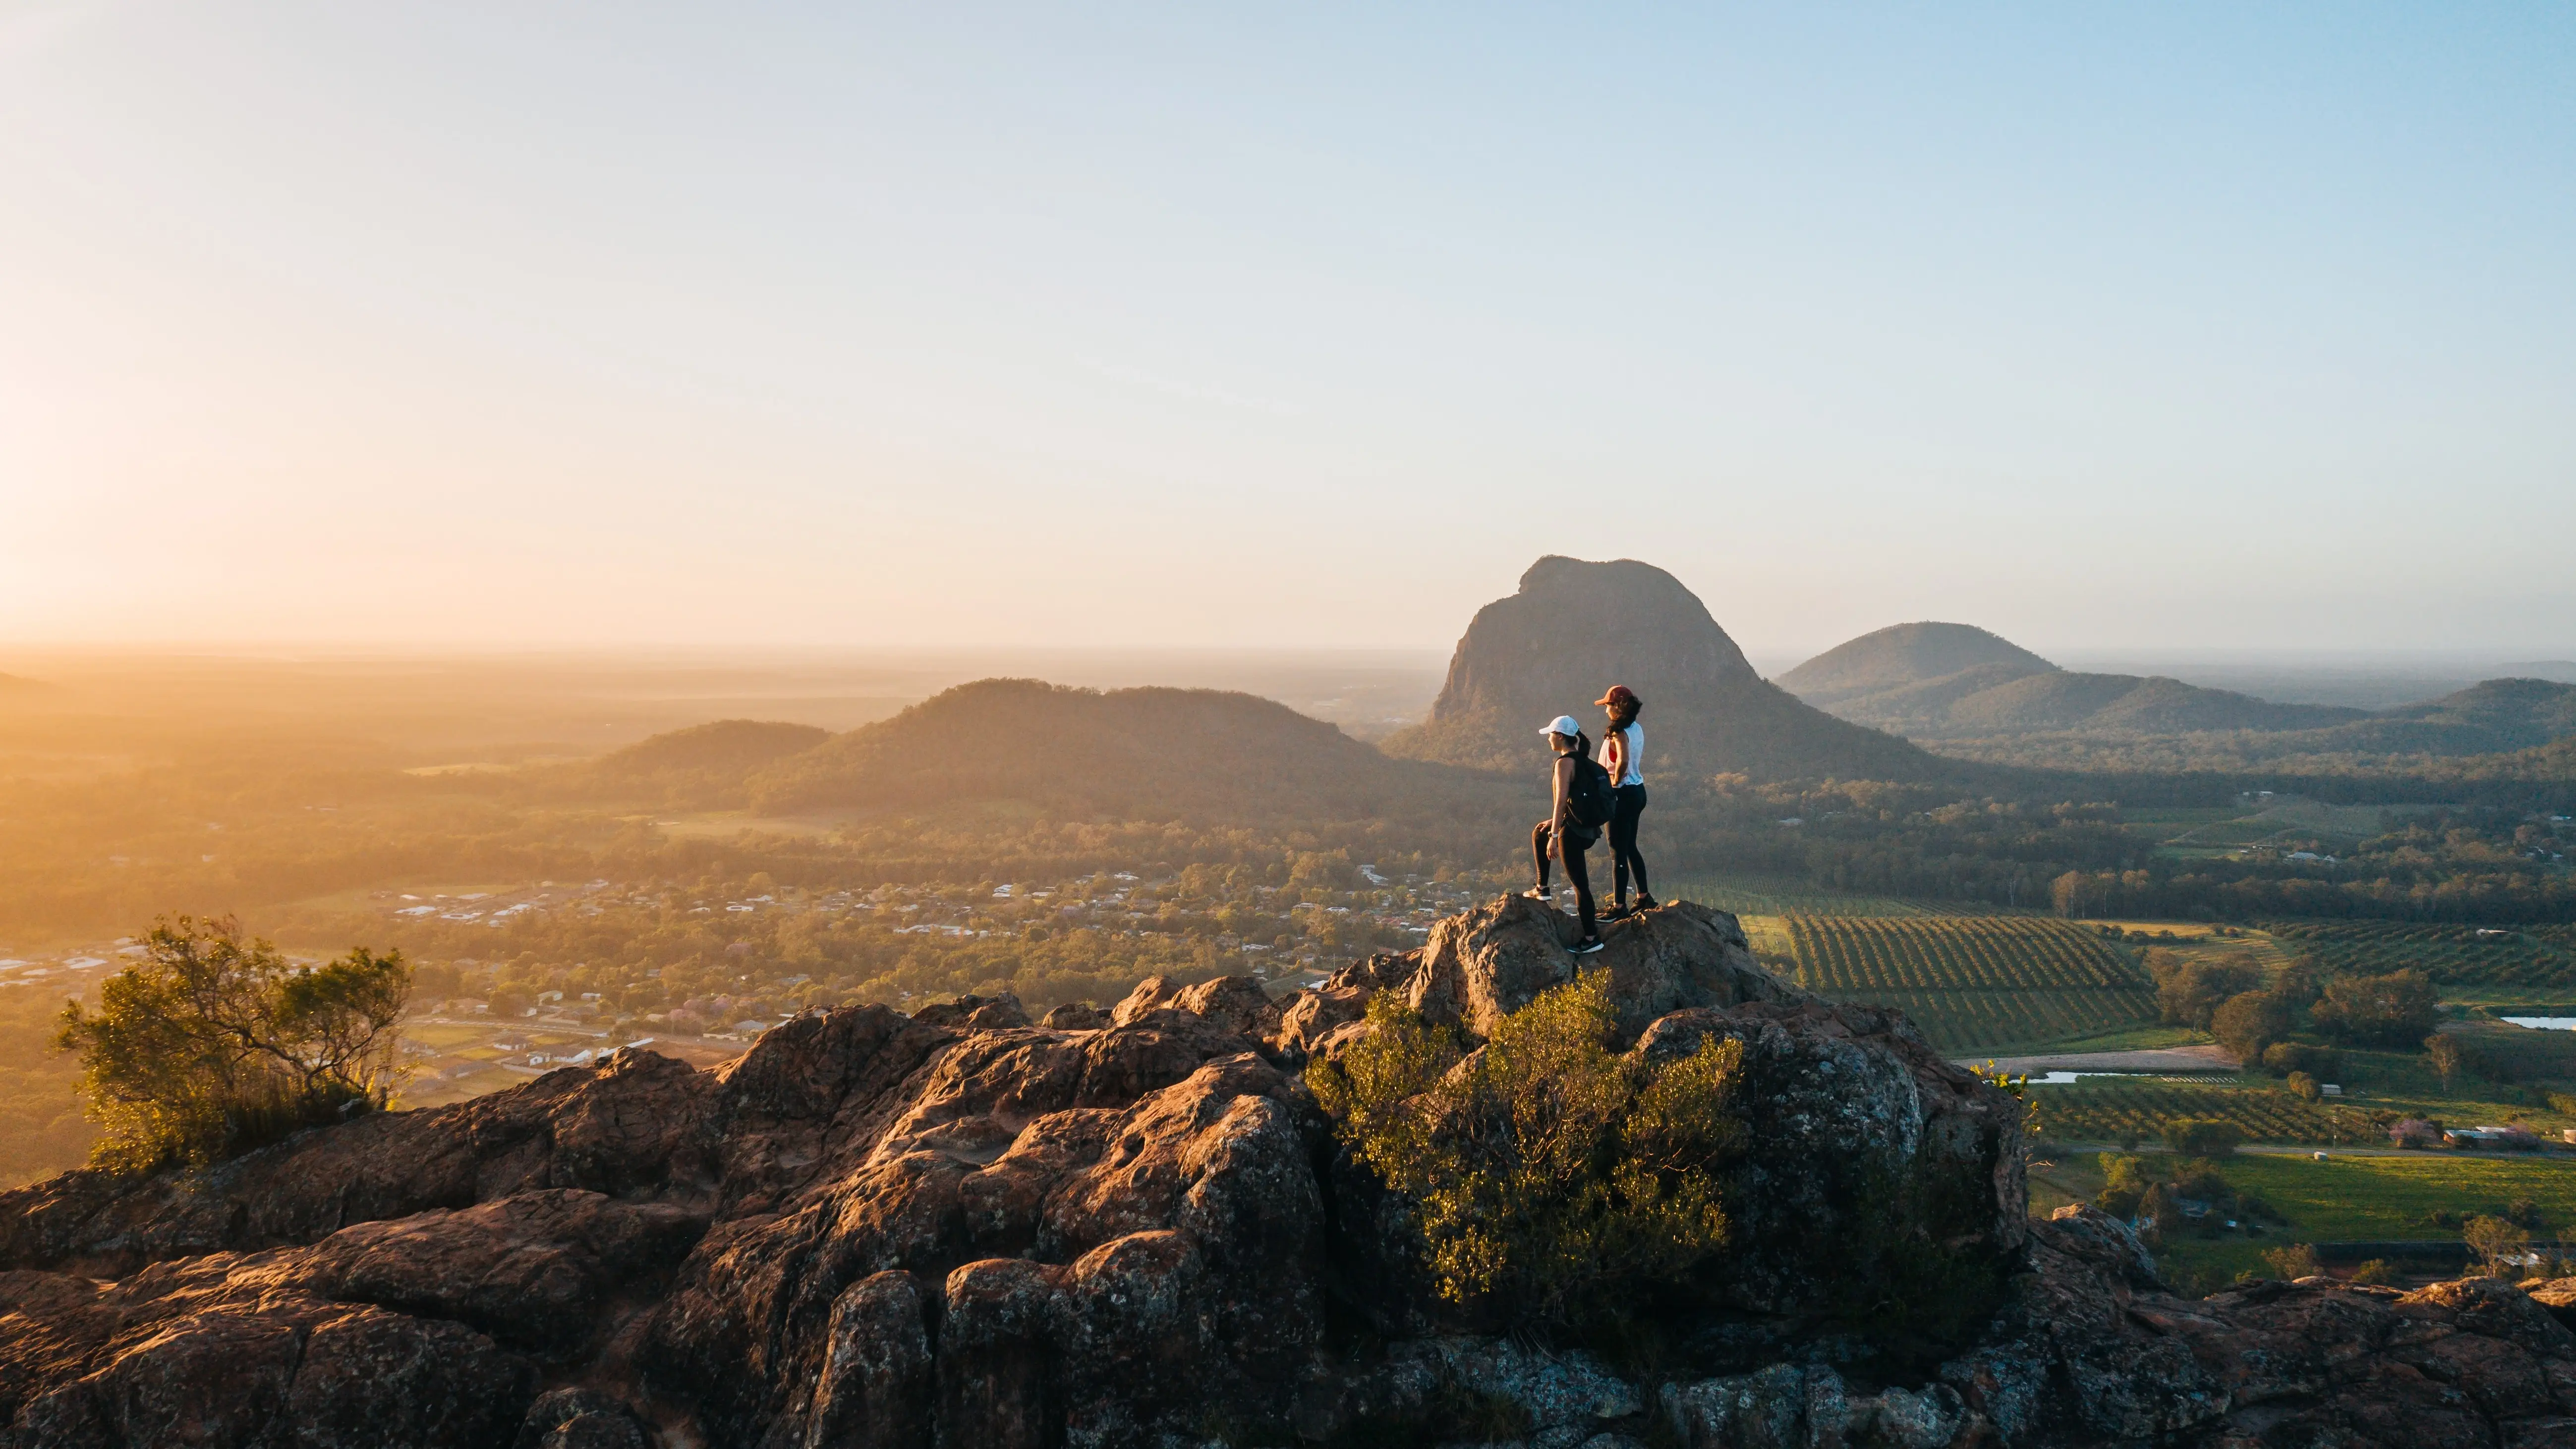 Hikers at the summit of Mount Ngungun in the Glasshouse Mountains at sunrise. Image credit: Tourism and Events Queensland